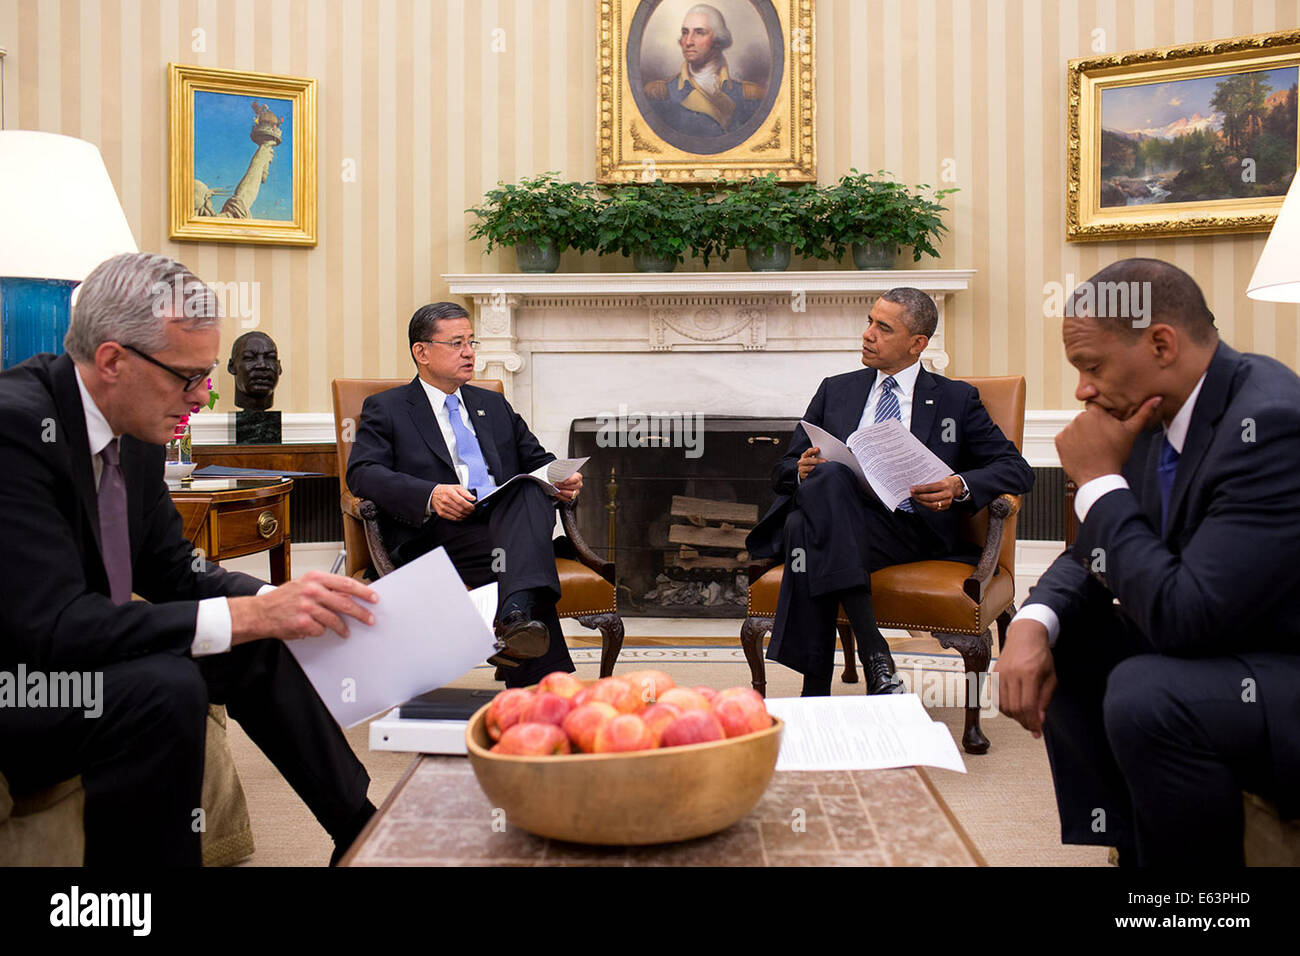 President Barack Obama meets with Veterans Affairs Secretary Eric K. Shinseki in the Oval Office, May 30, 2014. The President accepted Shinseki's resignation and named Sloan D. Gibson, United States Deputy Secretary of Veterans Affairs as Acting Secretary Stock Photo